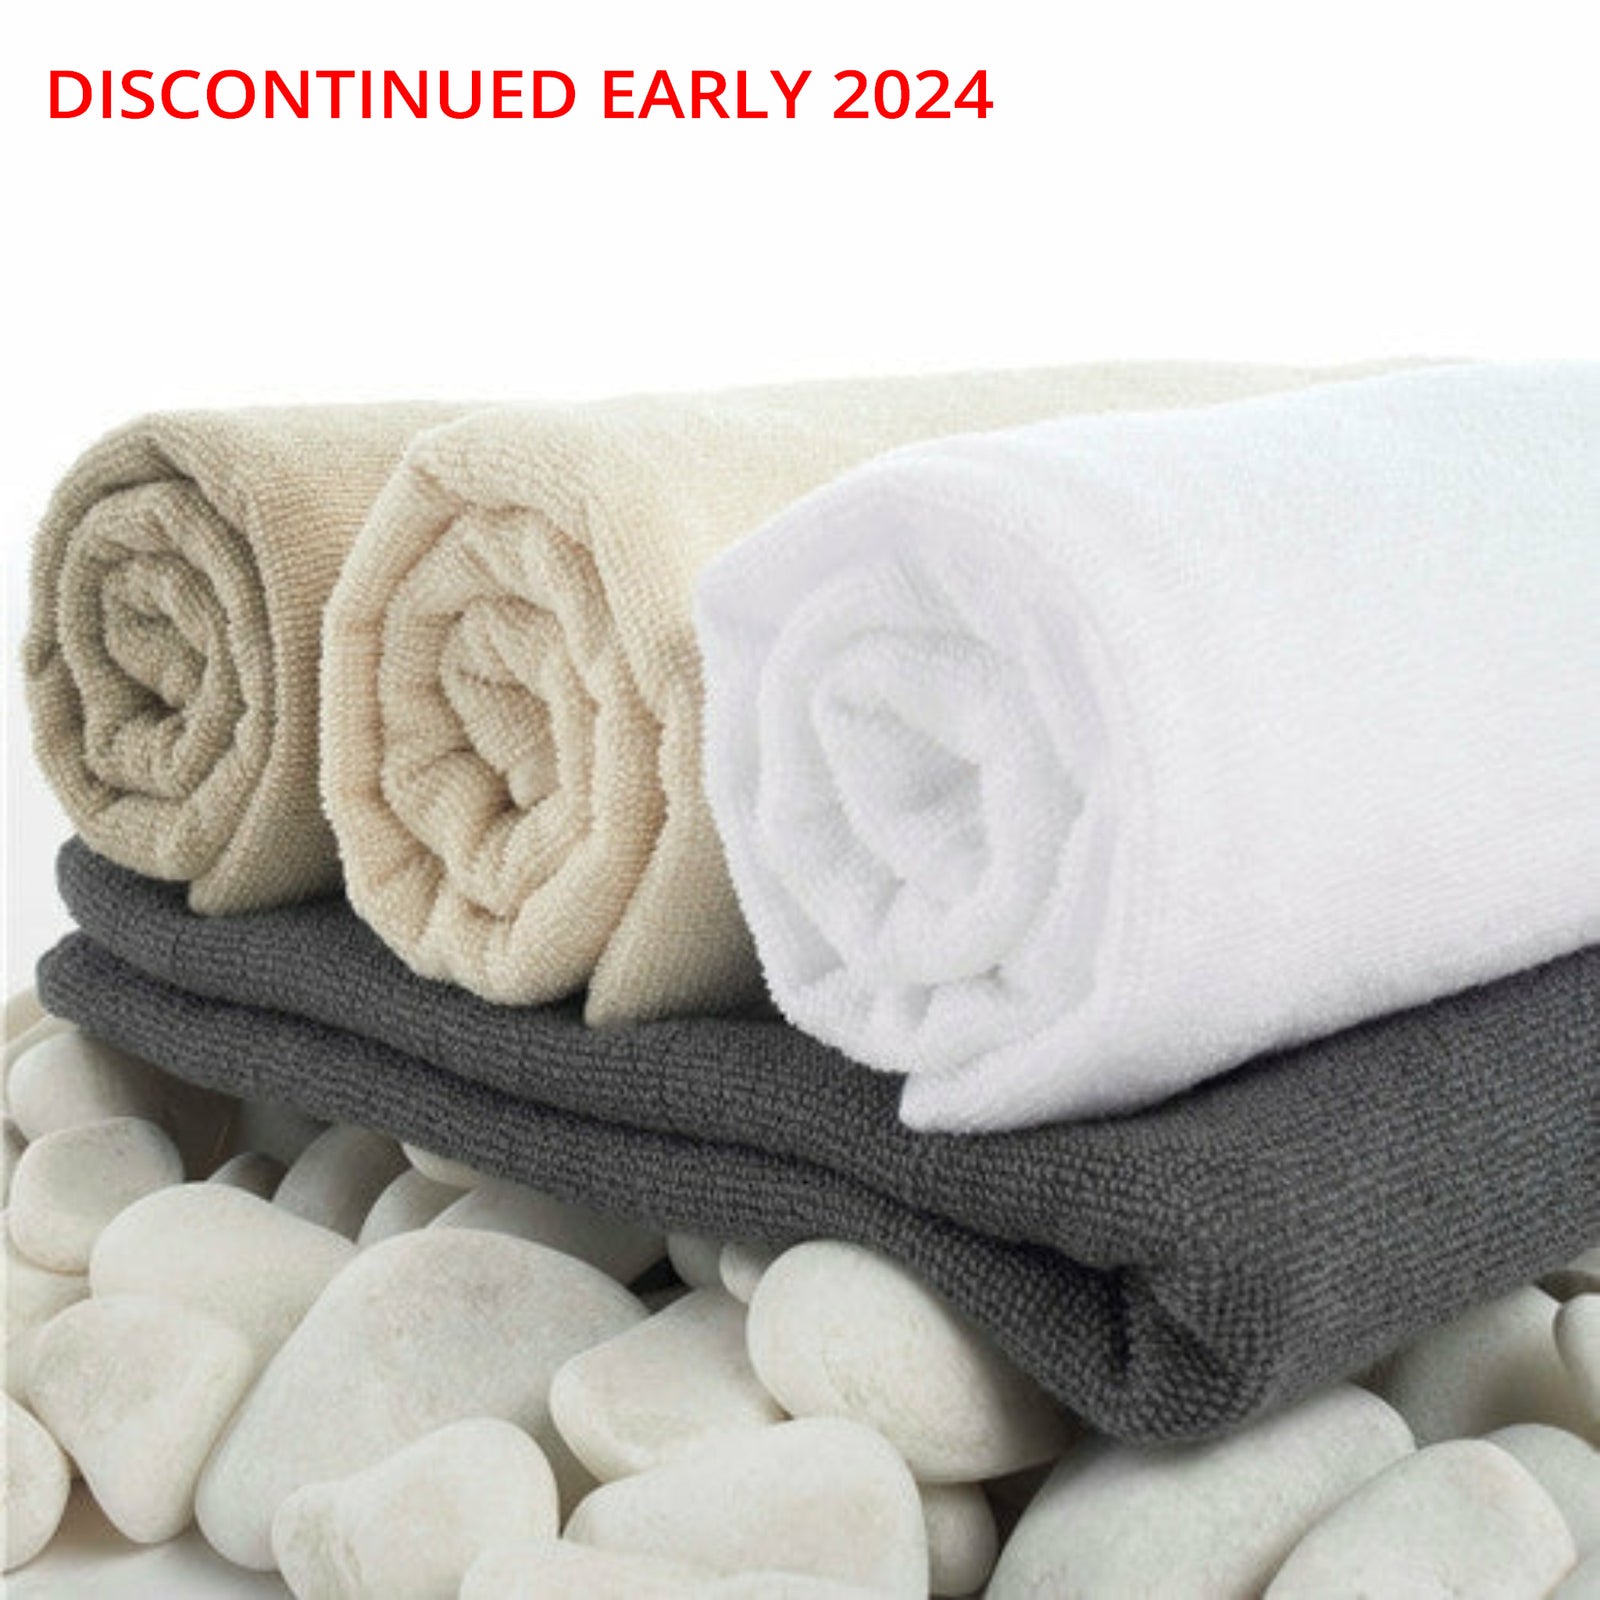 Why 100% Cotton Towels Are the Best